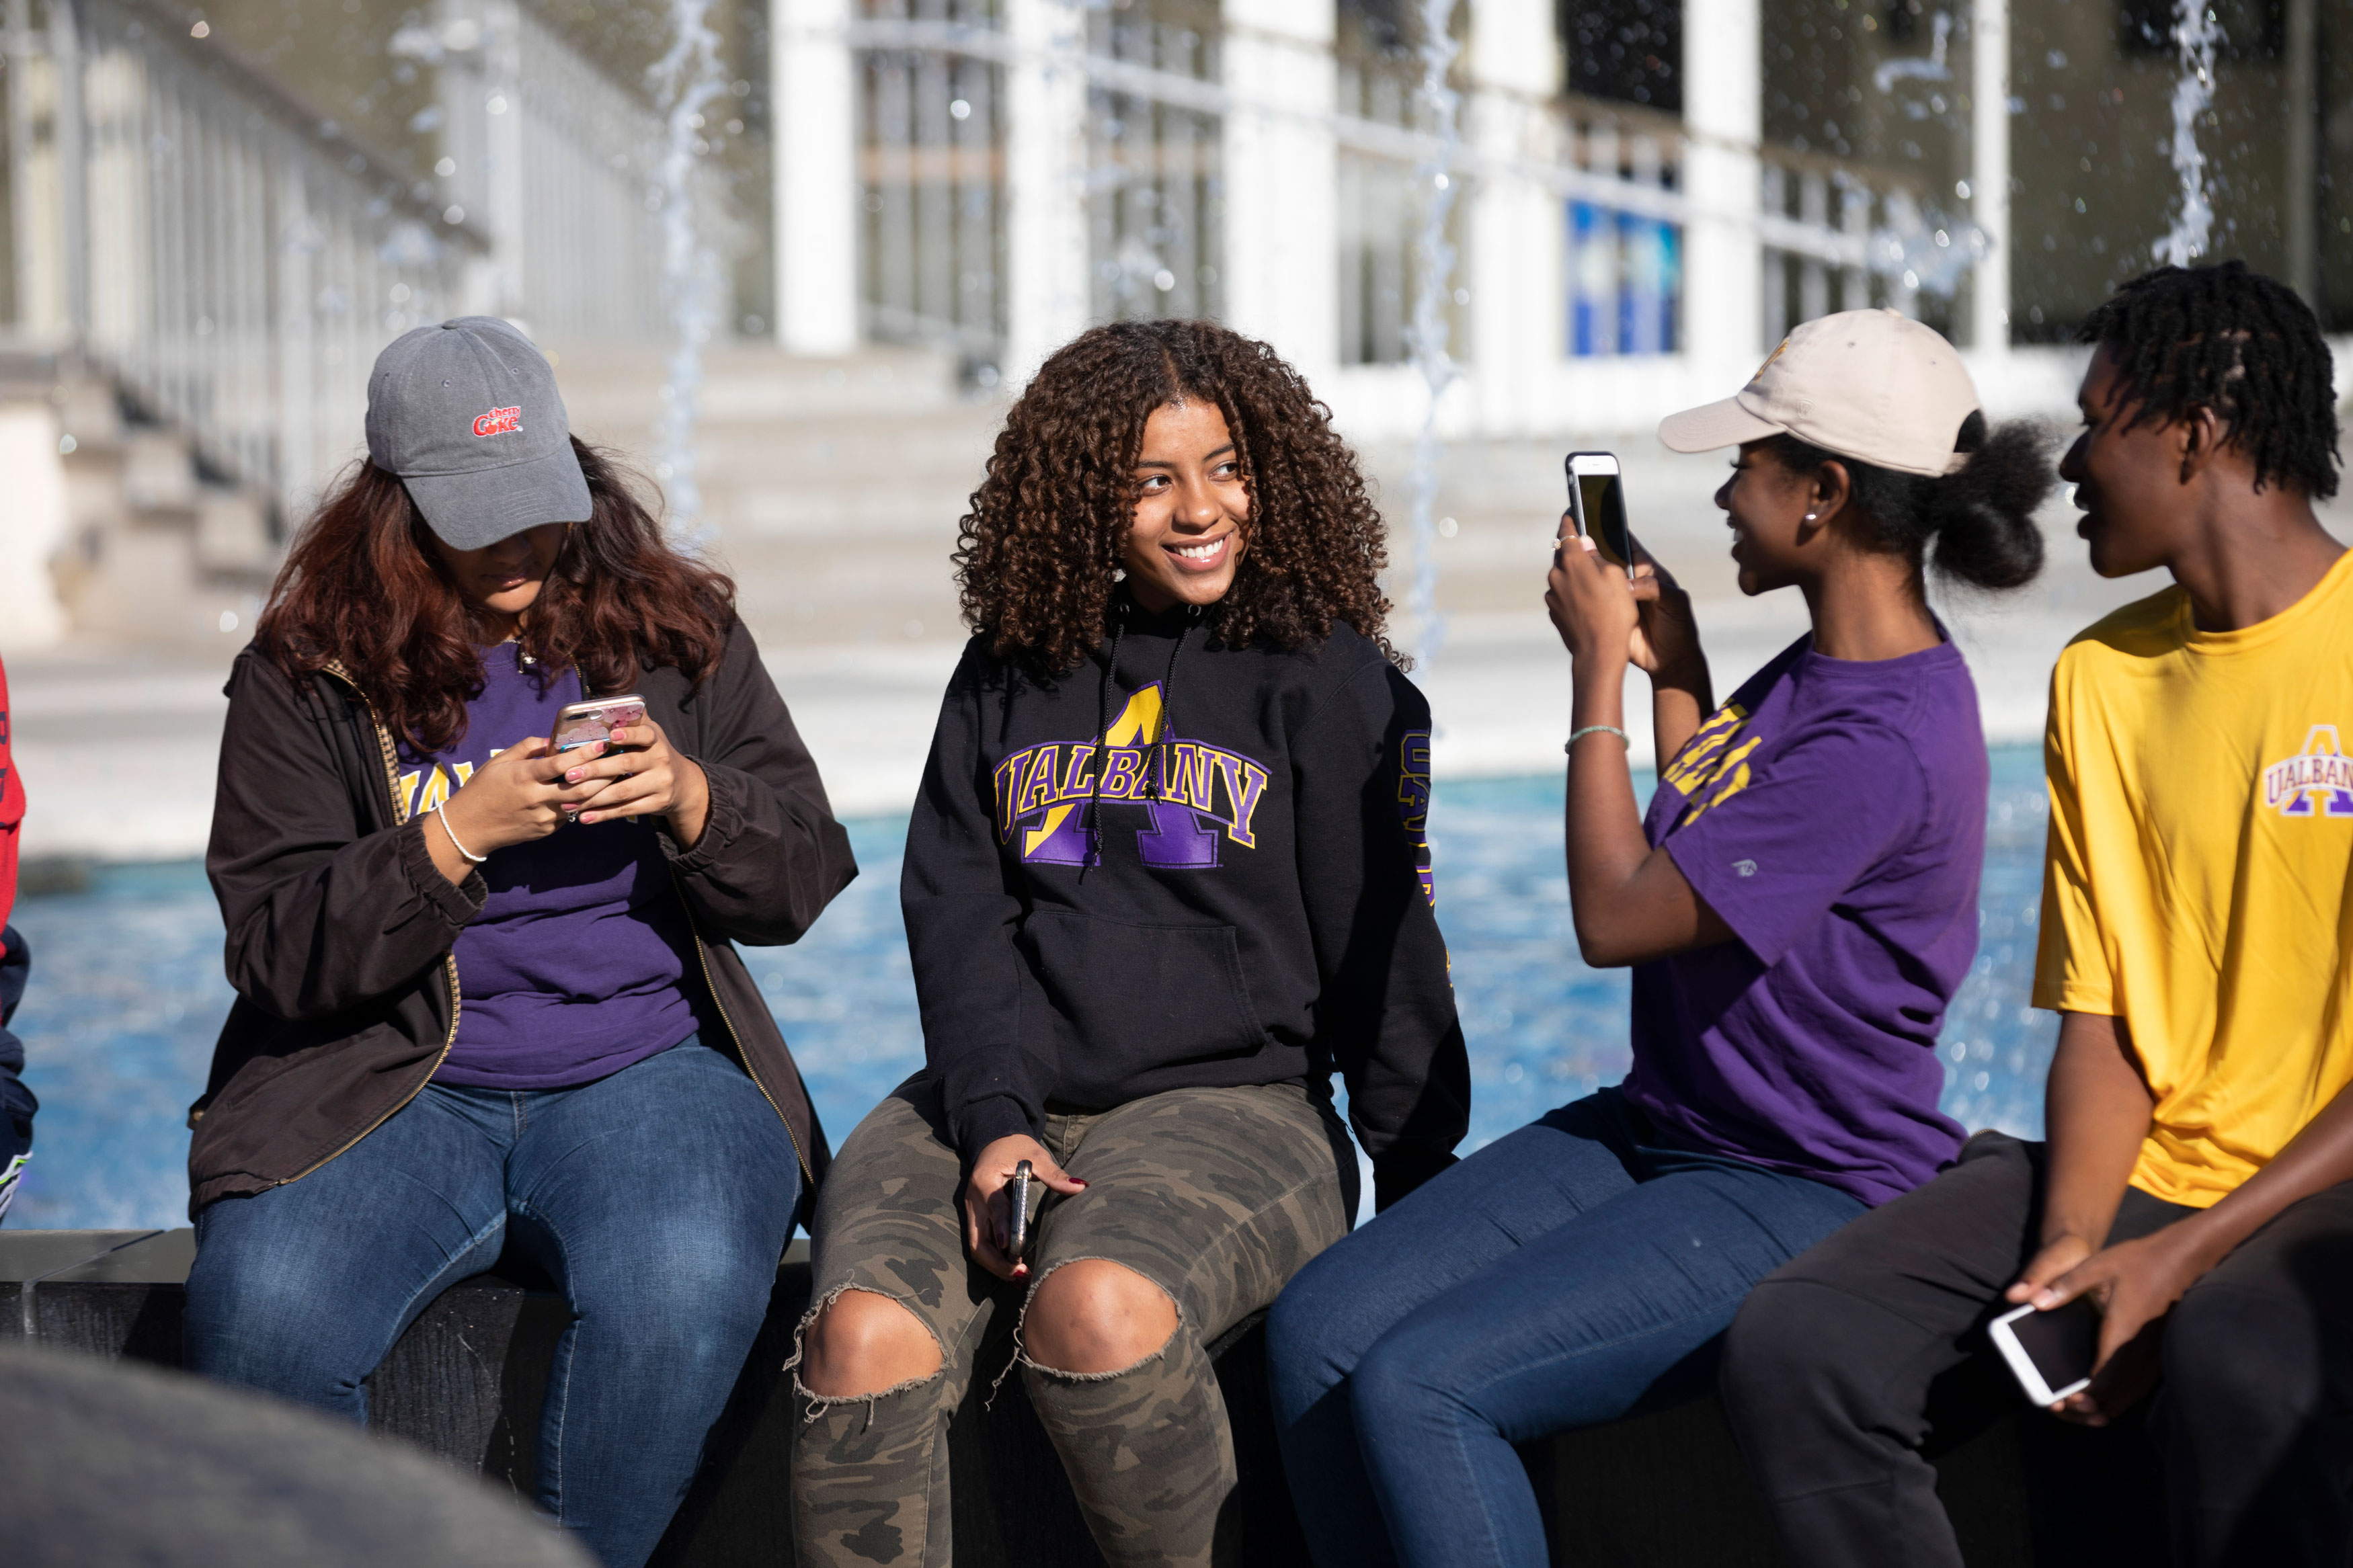 Four students sit on the edge of a fountain, one poses for a photo that the other is taking.